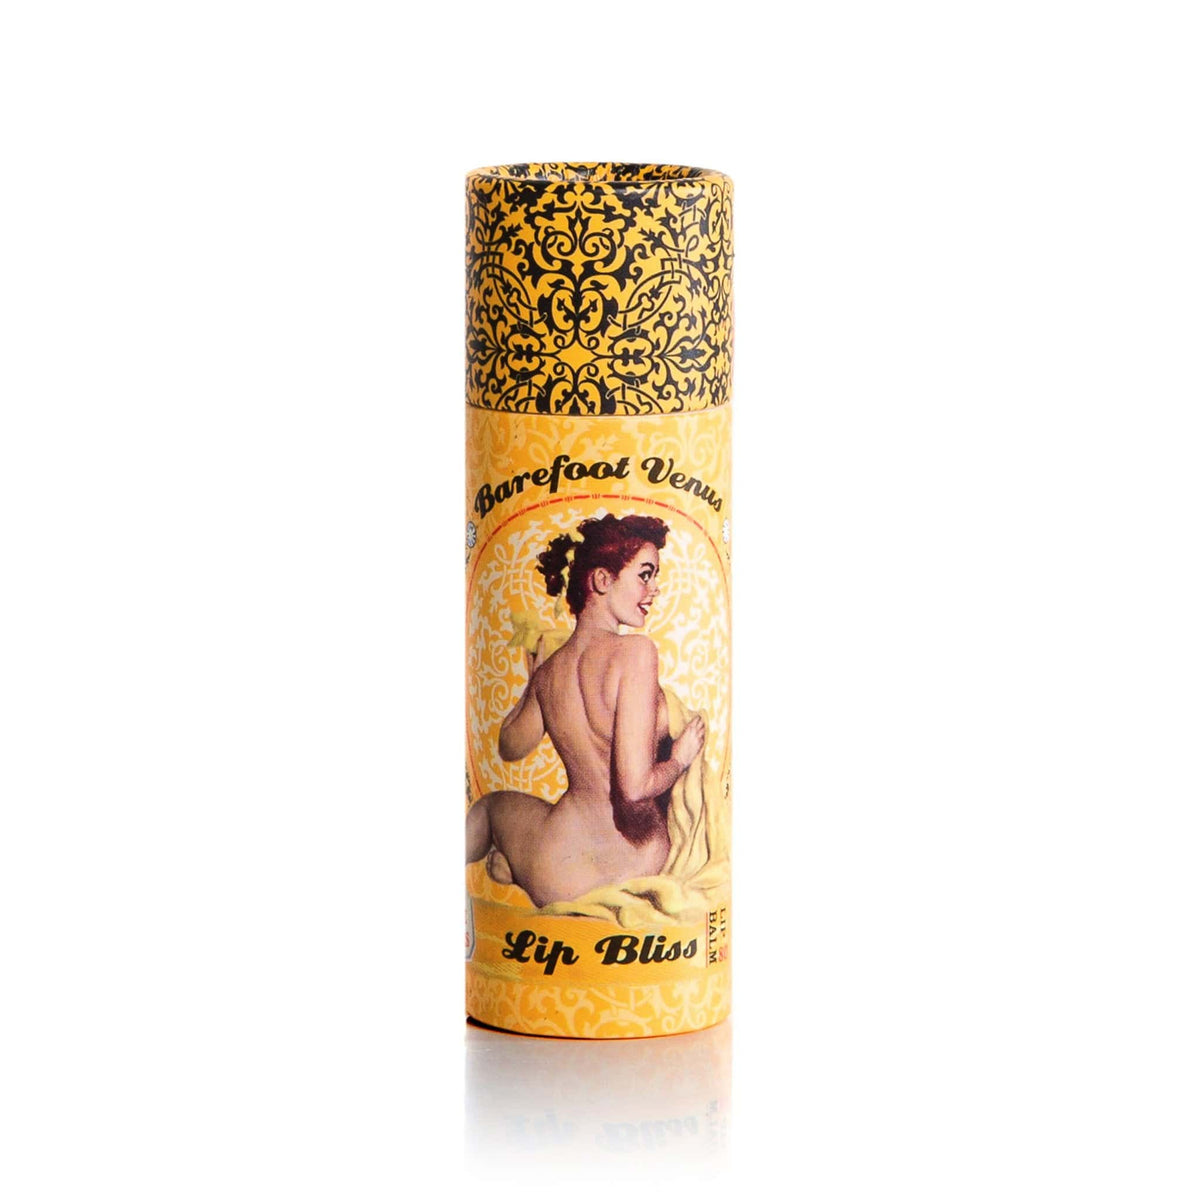 Lip Balm 100% NATURAL. NUTRIENT RICH. KISSED BY NATURE. Barefoot Venus